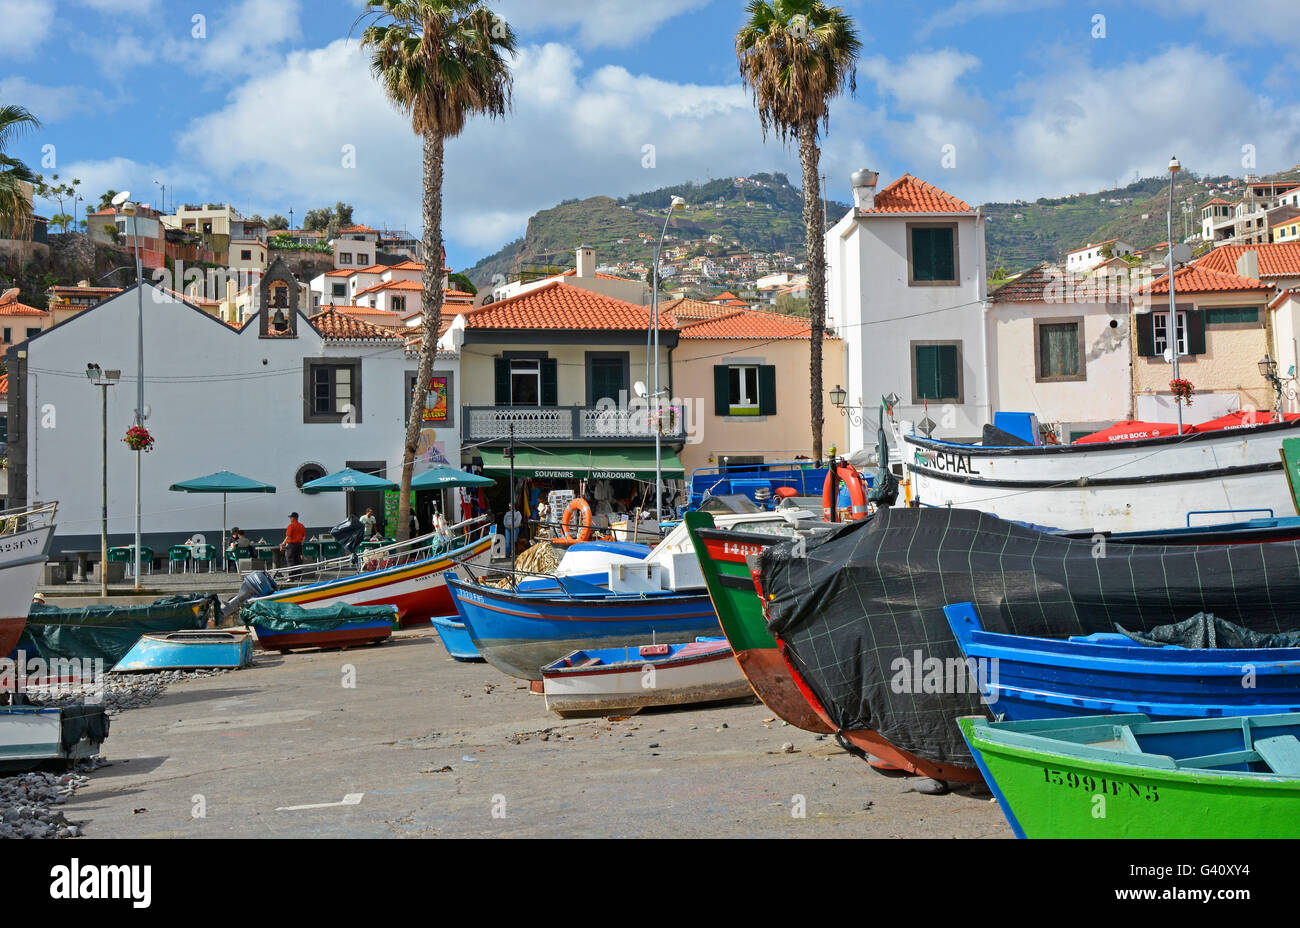 Fishing boats drawn up on beach and slipway at Camara de Lobos in Madeira, Portugal. With people in restaurants behind Stock Photo